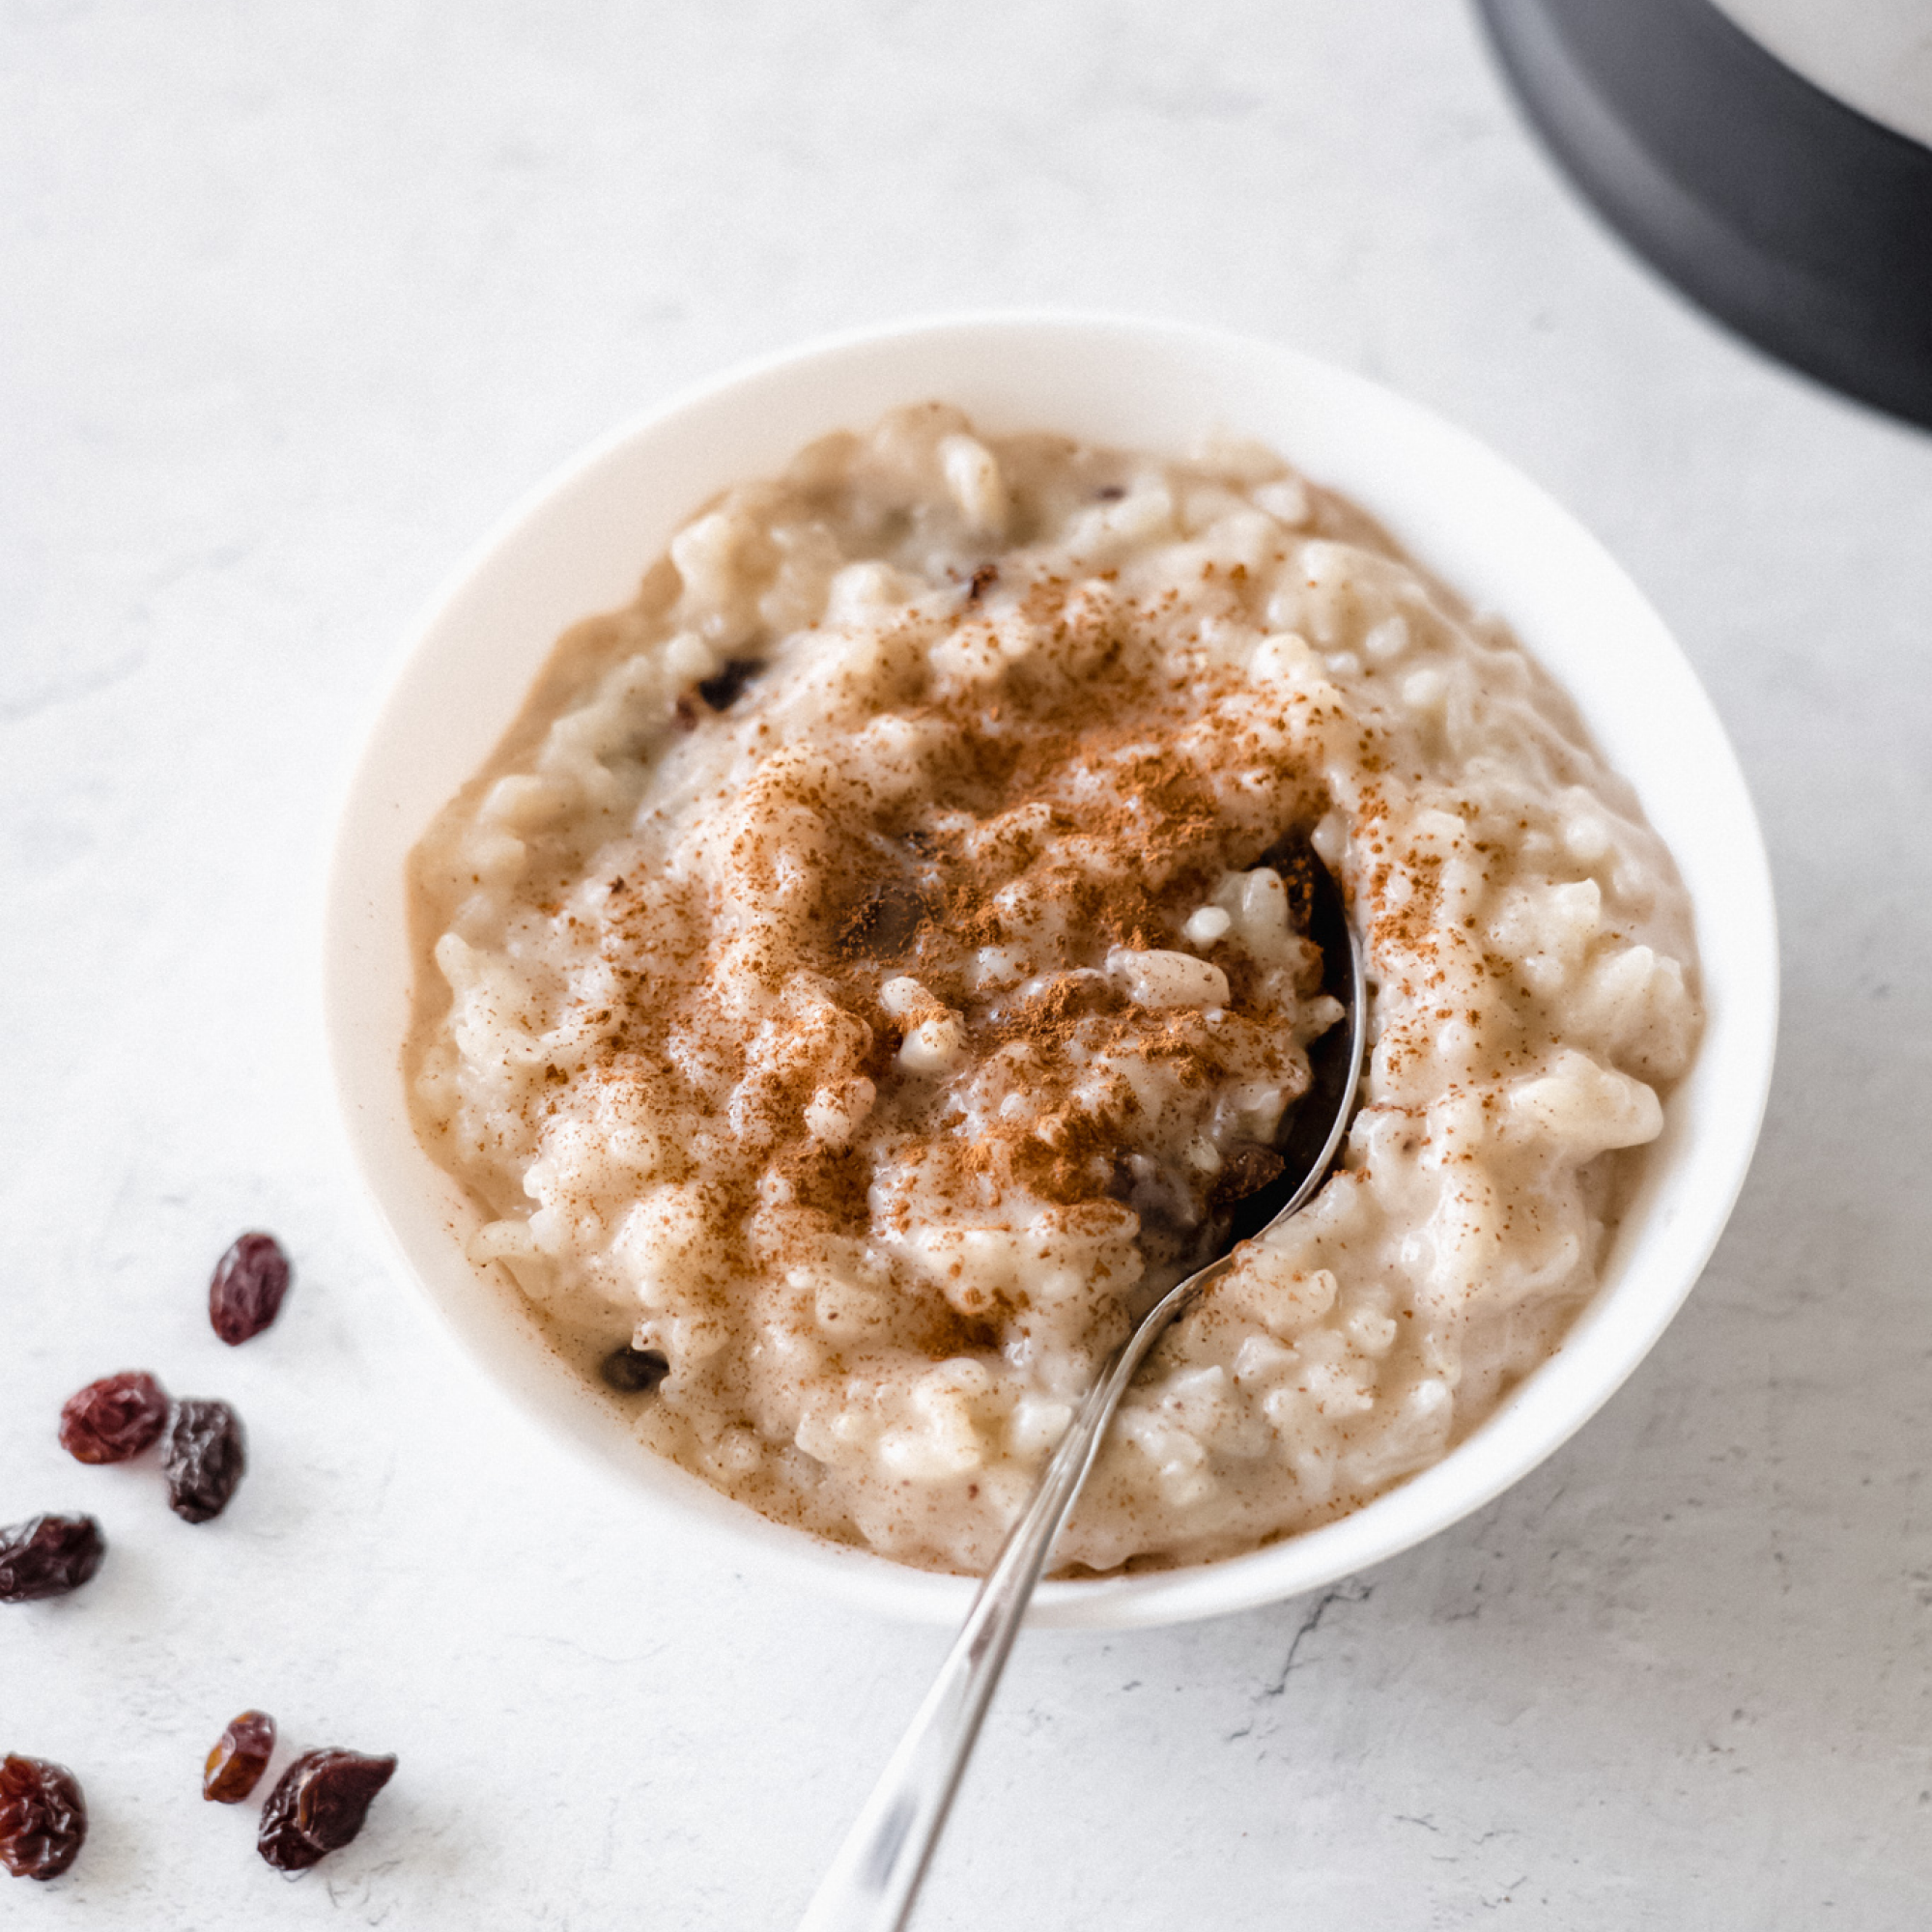 Creamy, rich Rice Pudding made with Almond Cow's almond milk machine